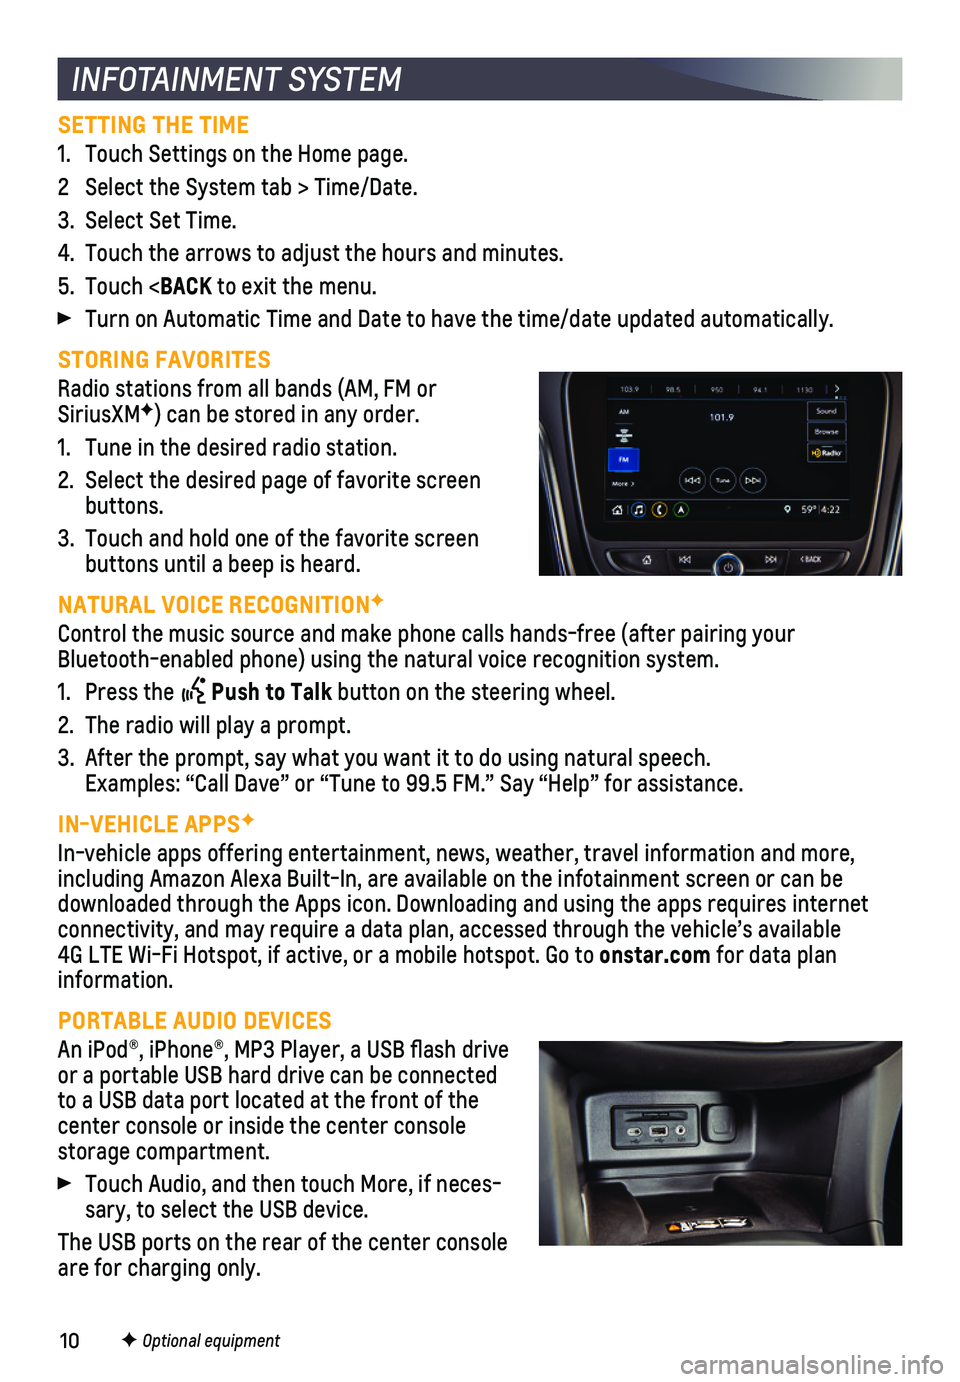 CHEVROLET EQUINOX 2021  Get To Know Guide 10F Optional equipment
INFOTAINMENT SYSTEM
SETTING THE TIME
1. Touch Settings on the Home page. 
2 Select the System tab > Time/Date.
3. Select Set Time. 
4. Touch the arrows to adjust the hours and m